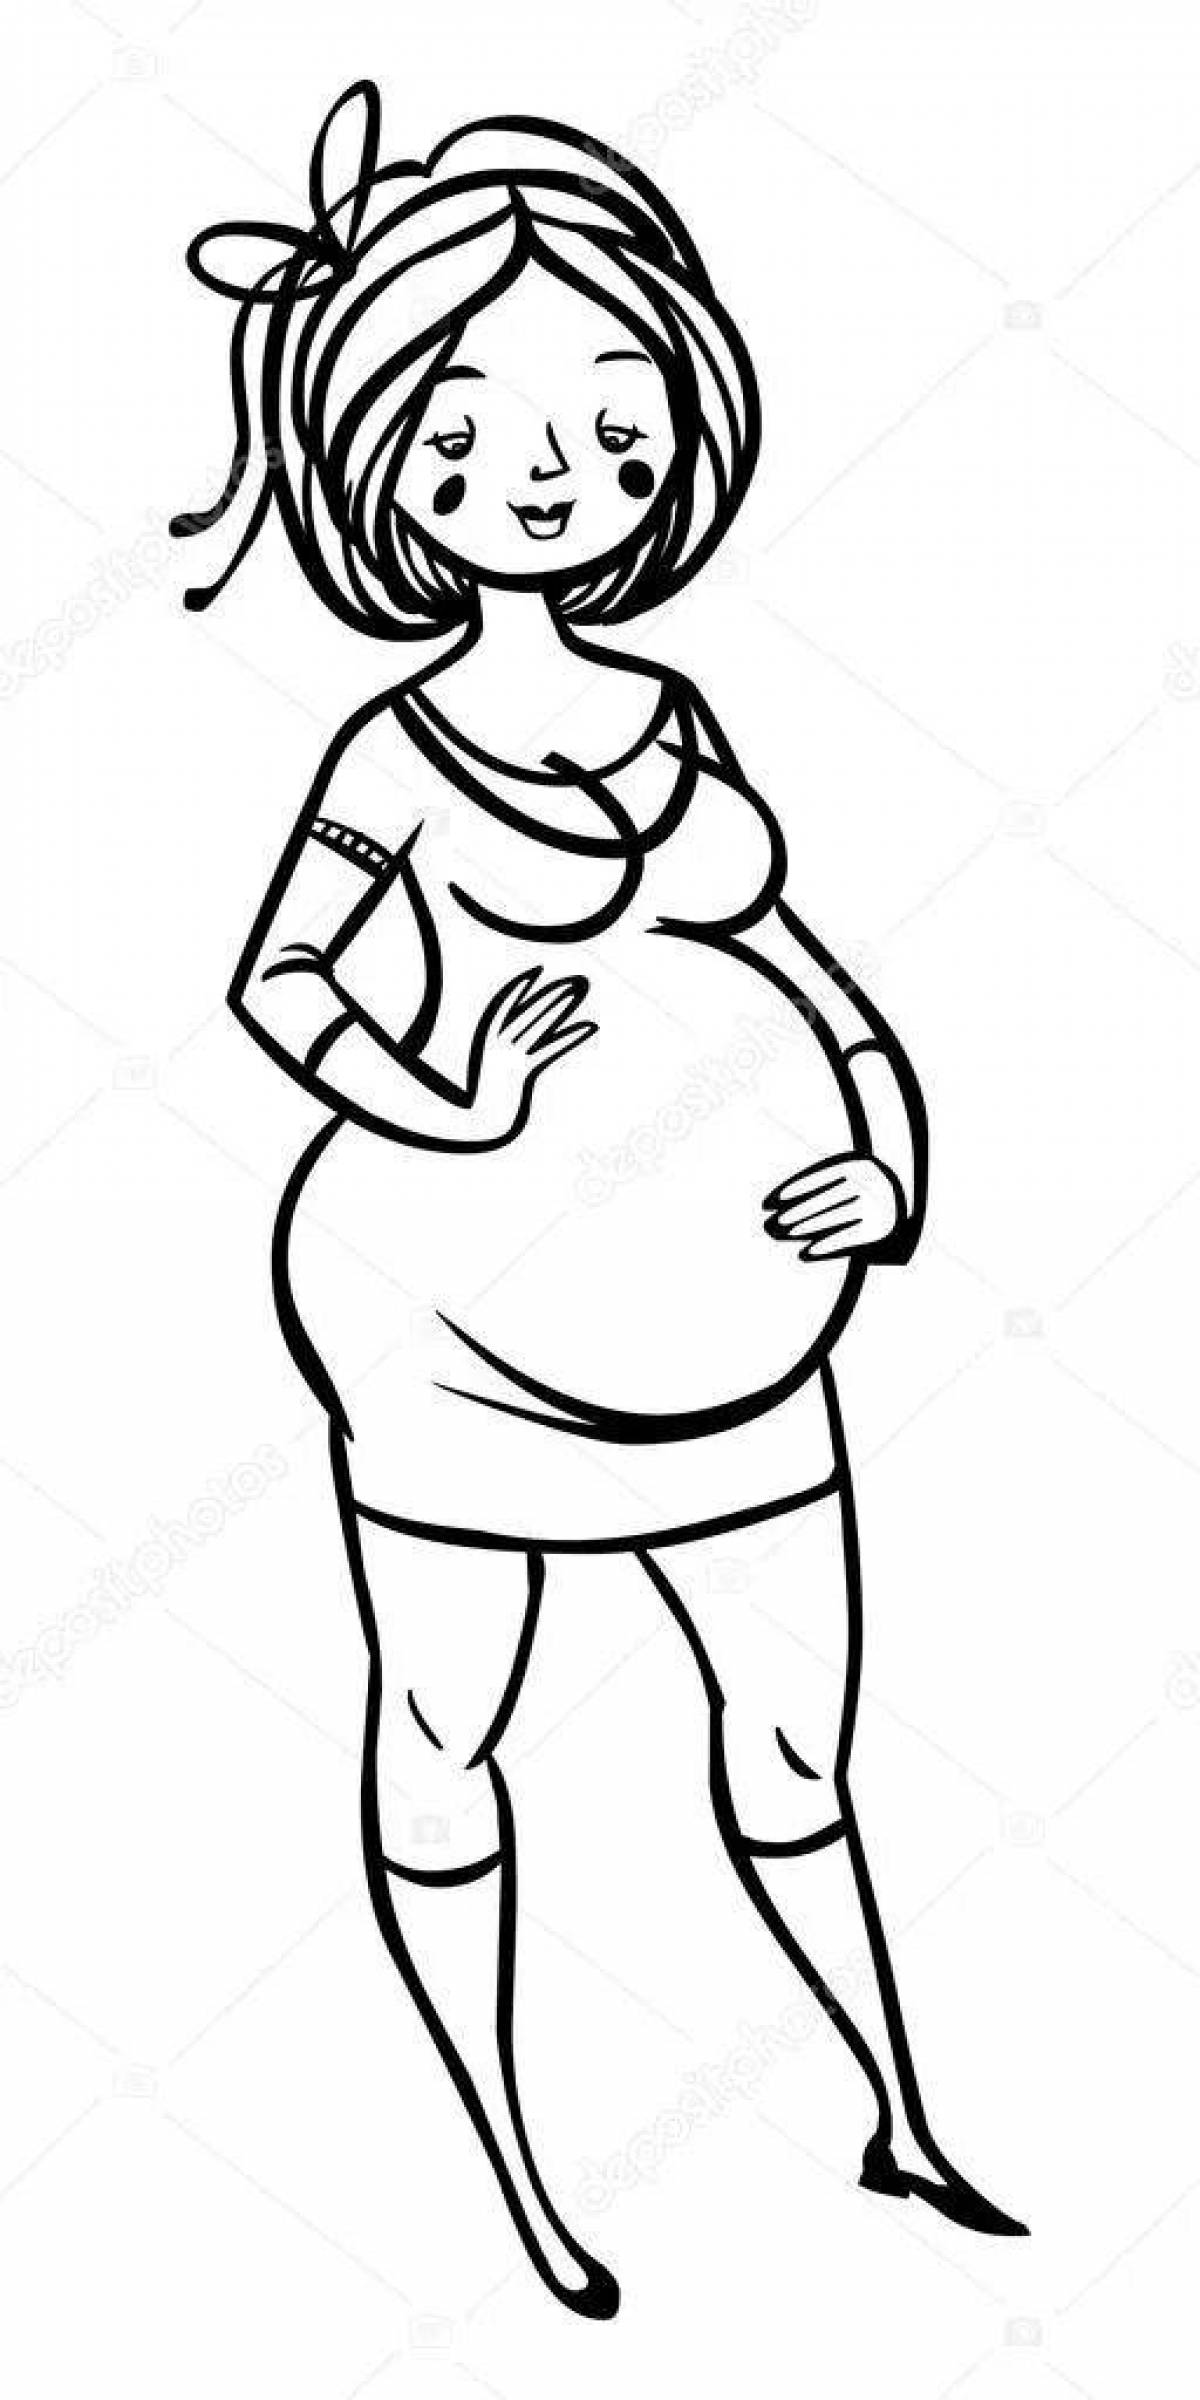 Glowing pregnant woman coloring page